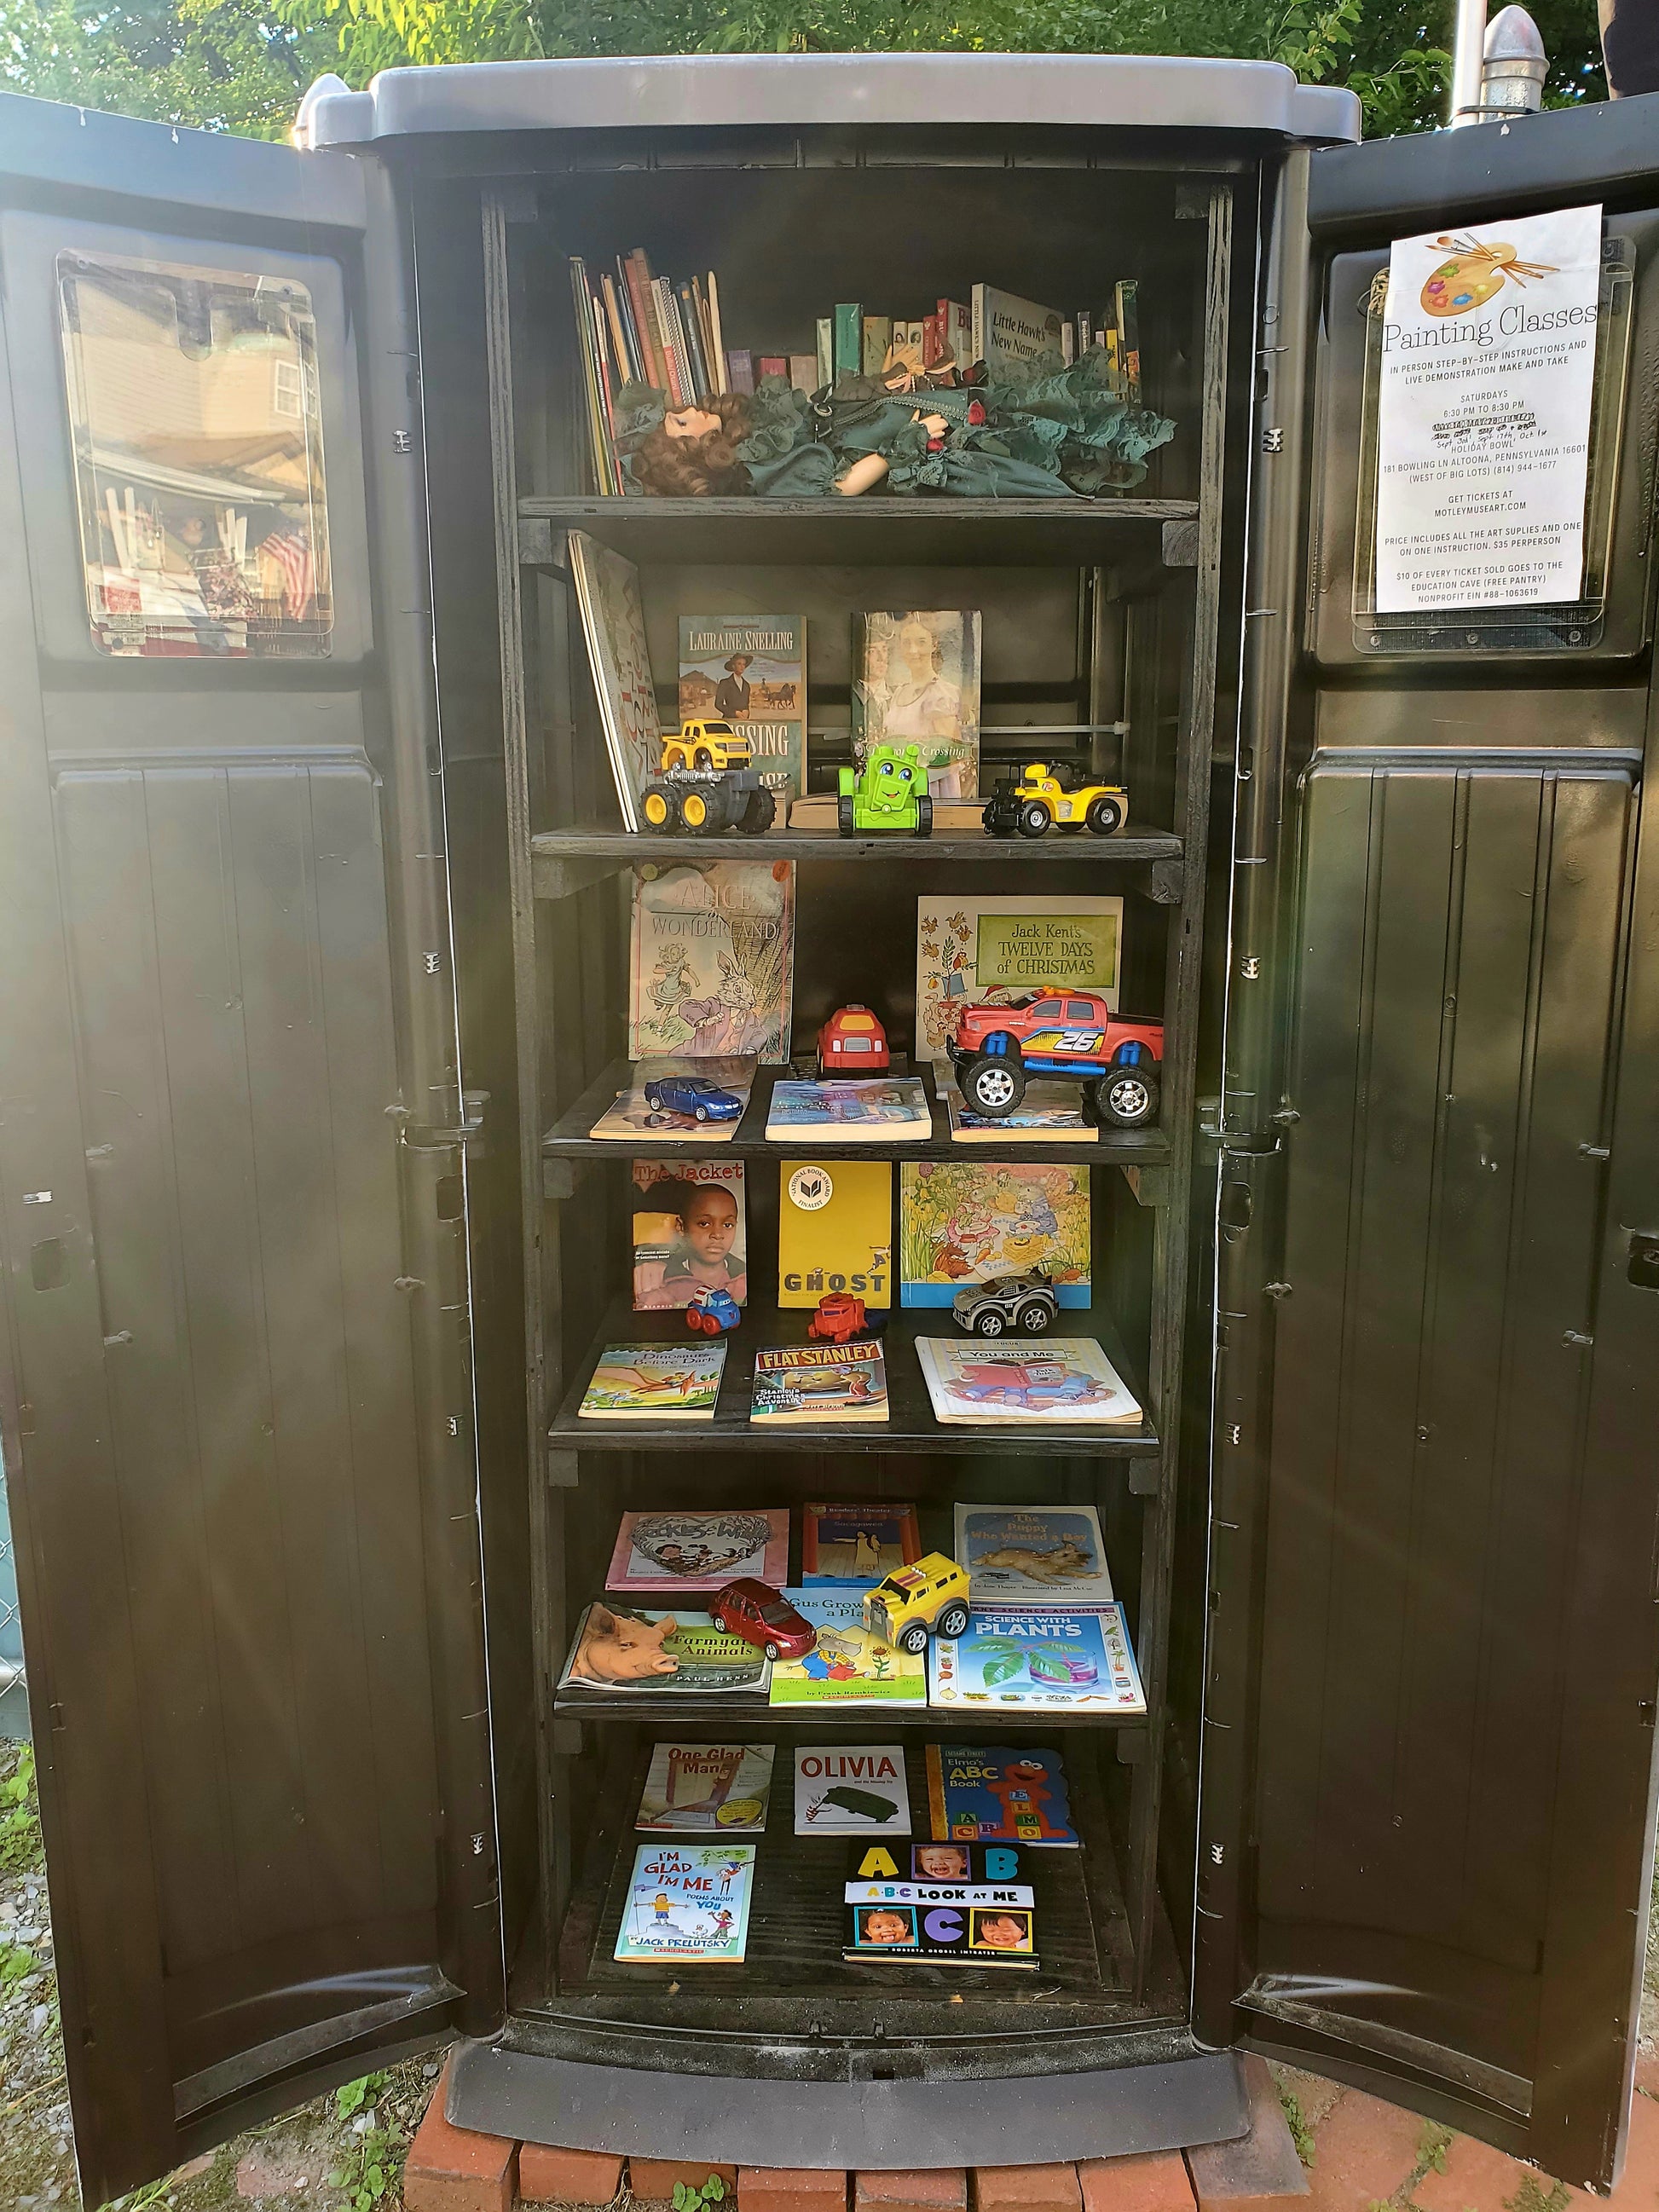 Everything in this toy box is free. All the items inside are education related with new items being added regularly. Take what you need, give what you can.

This pantry is accessible 7 days a week from dawn to dusk.

